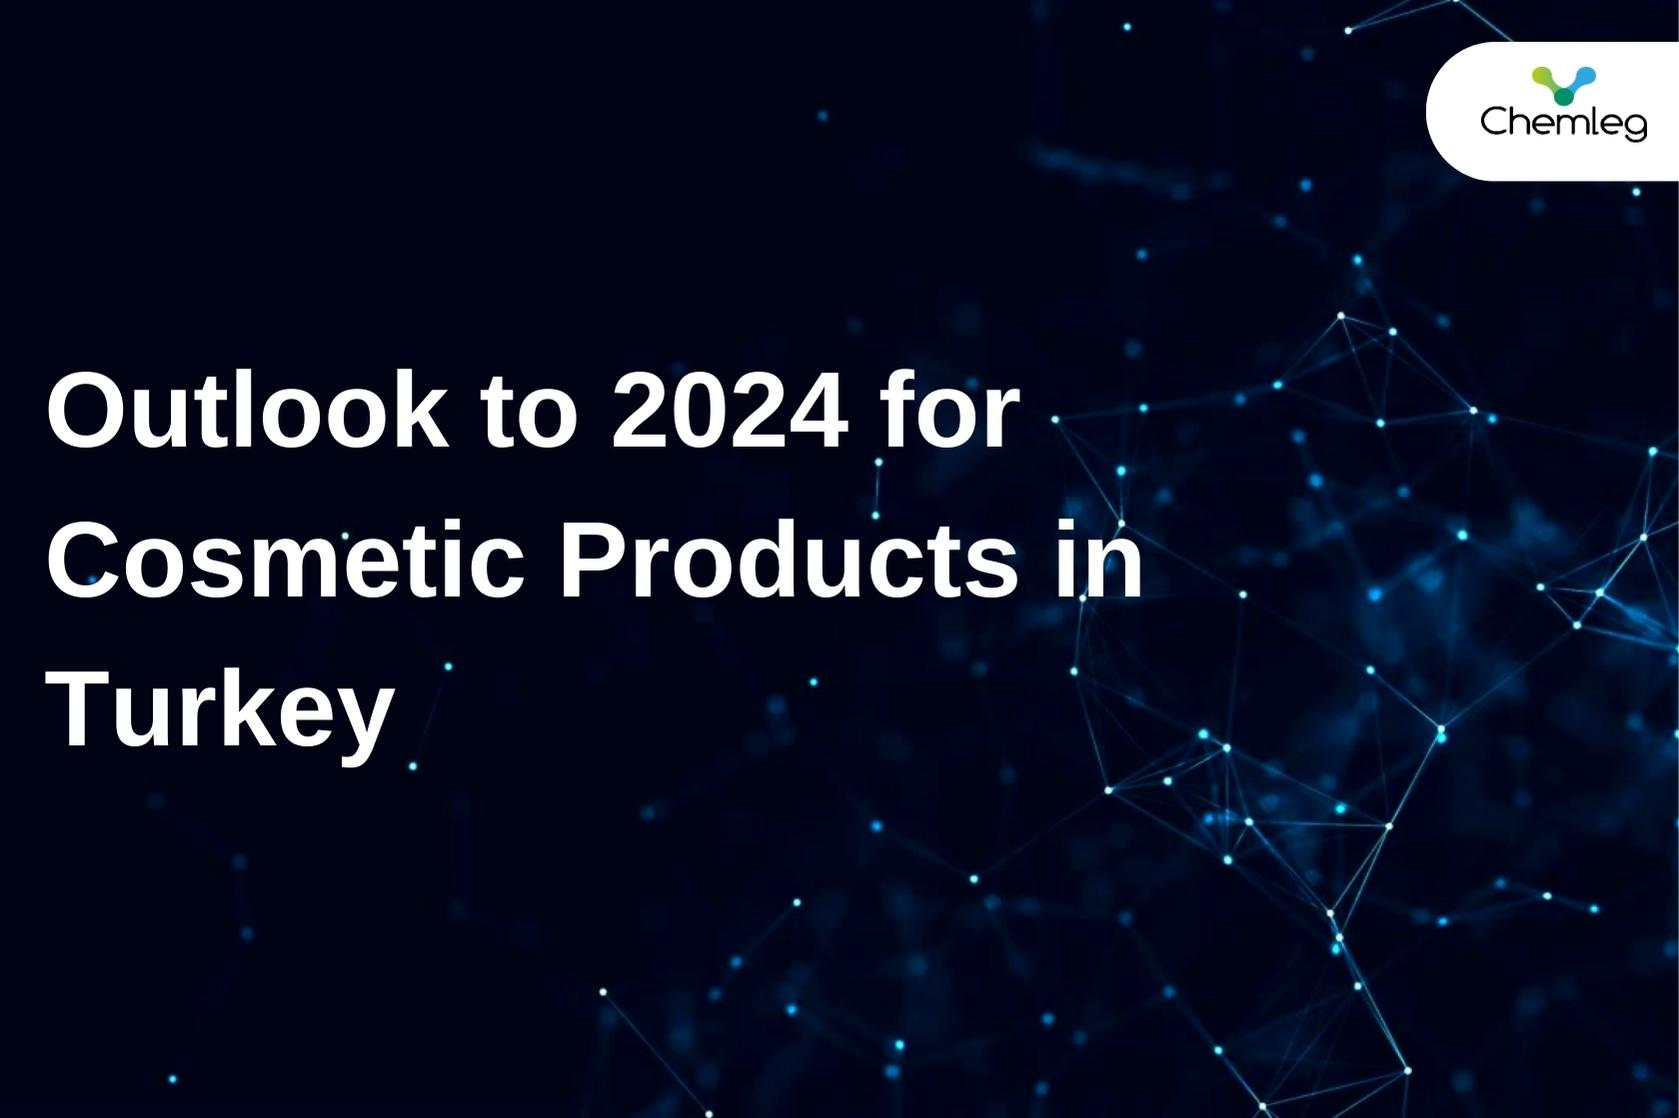 Outlook to 2024 for Cosmetic Products in Turkey